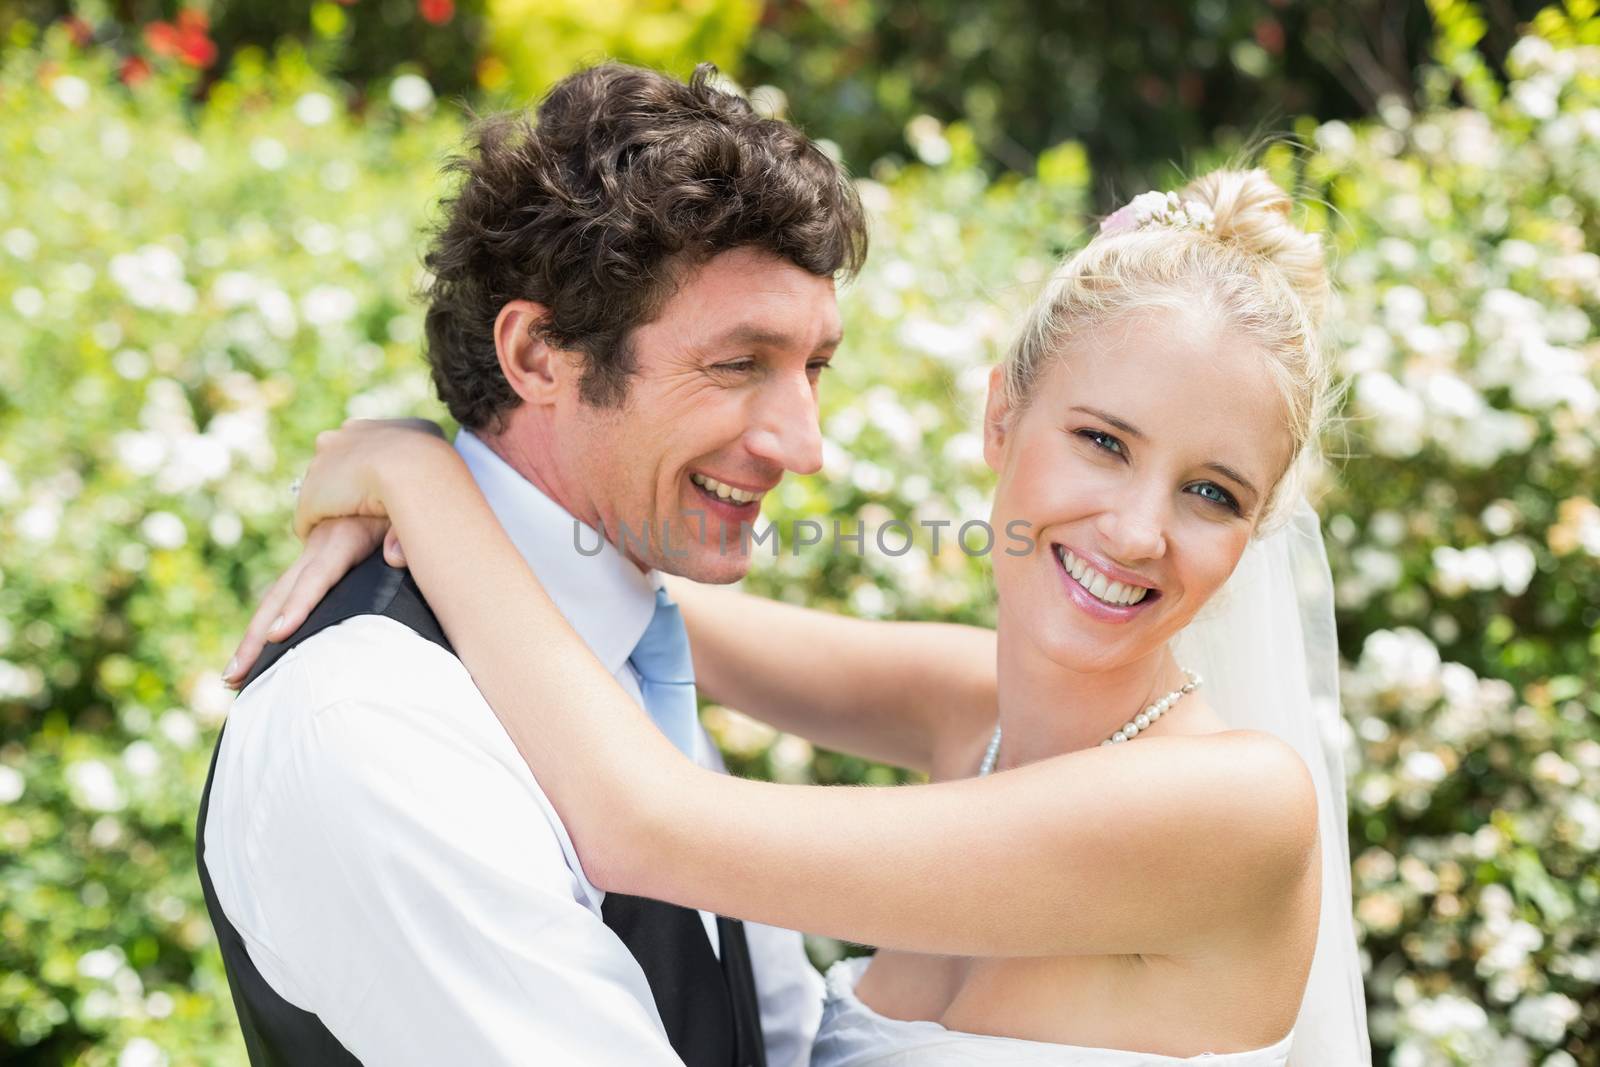 Romantic smiling newlywed couple hugging each other in the countryside